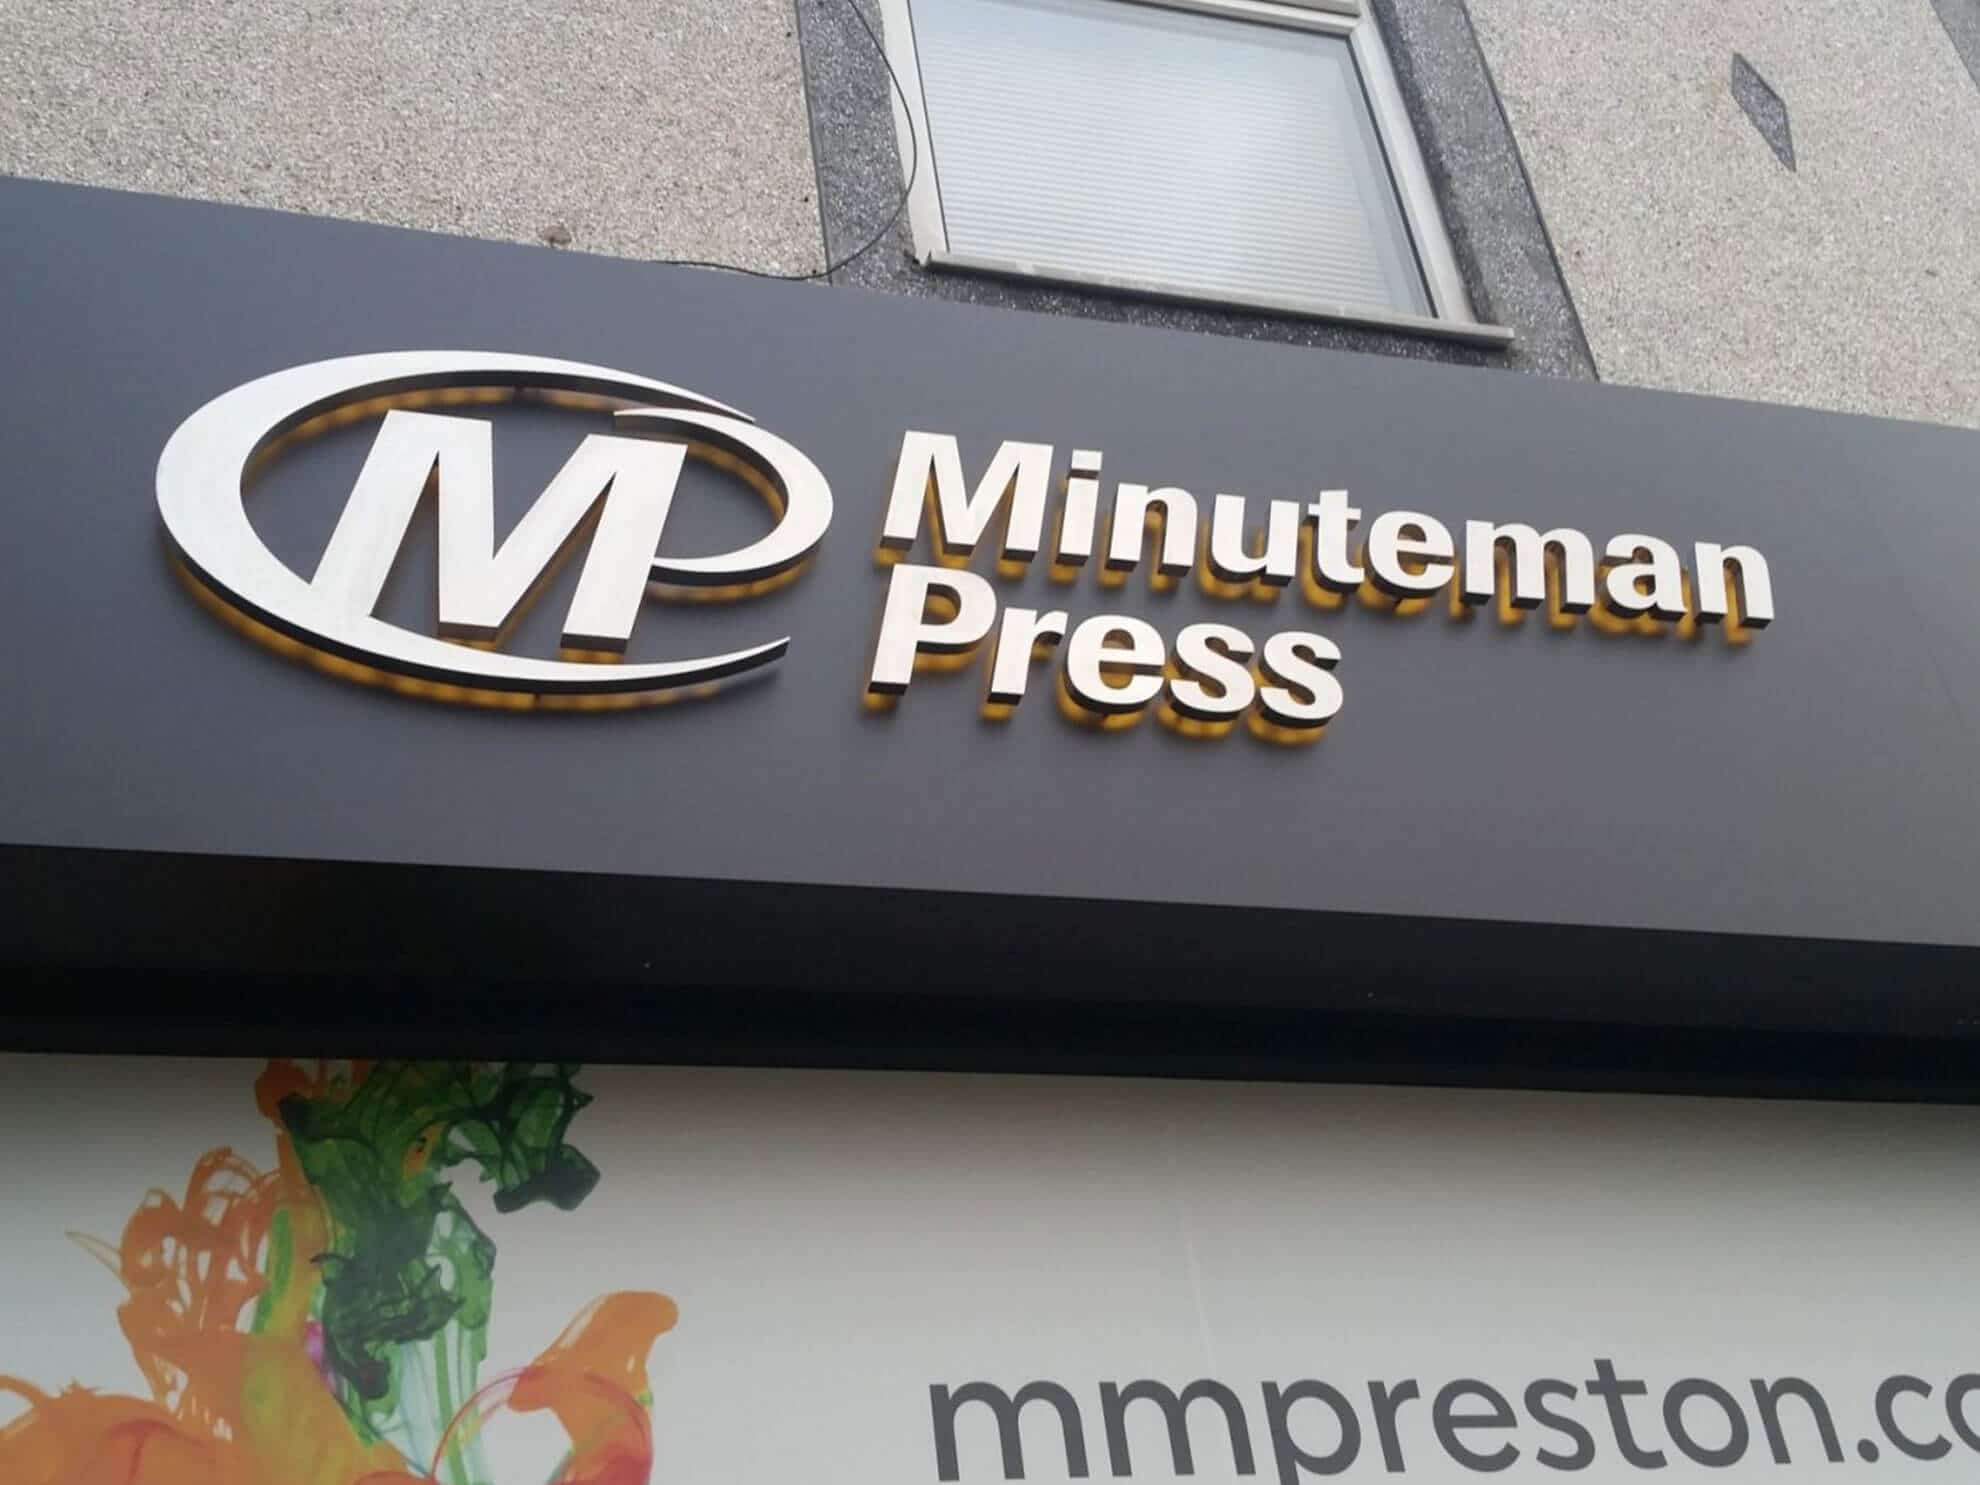 Minuteman Press sign - Built up brushed stainless steel halo illuminated letters